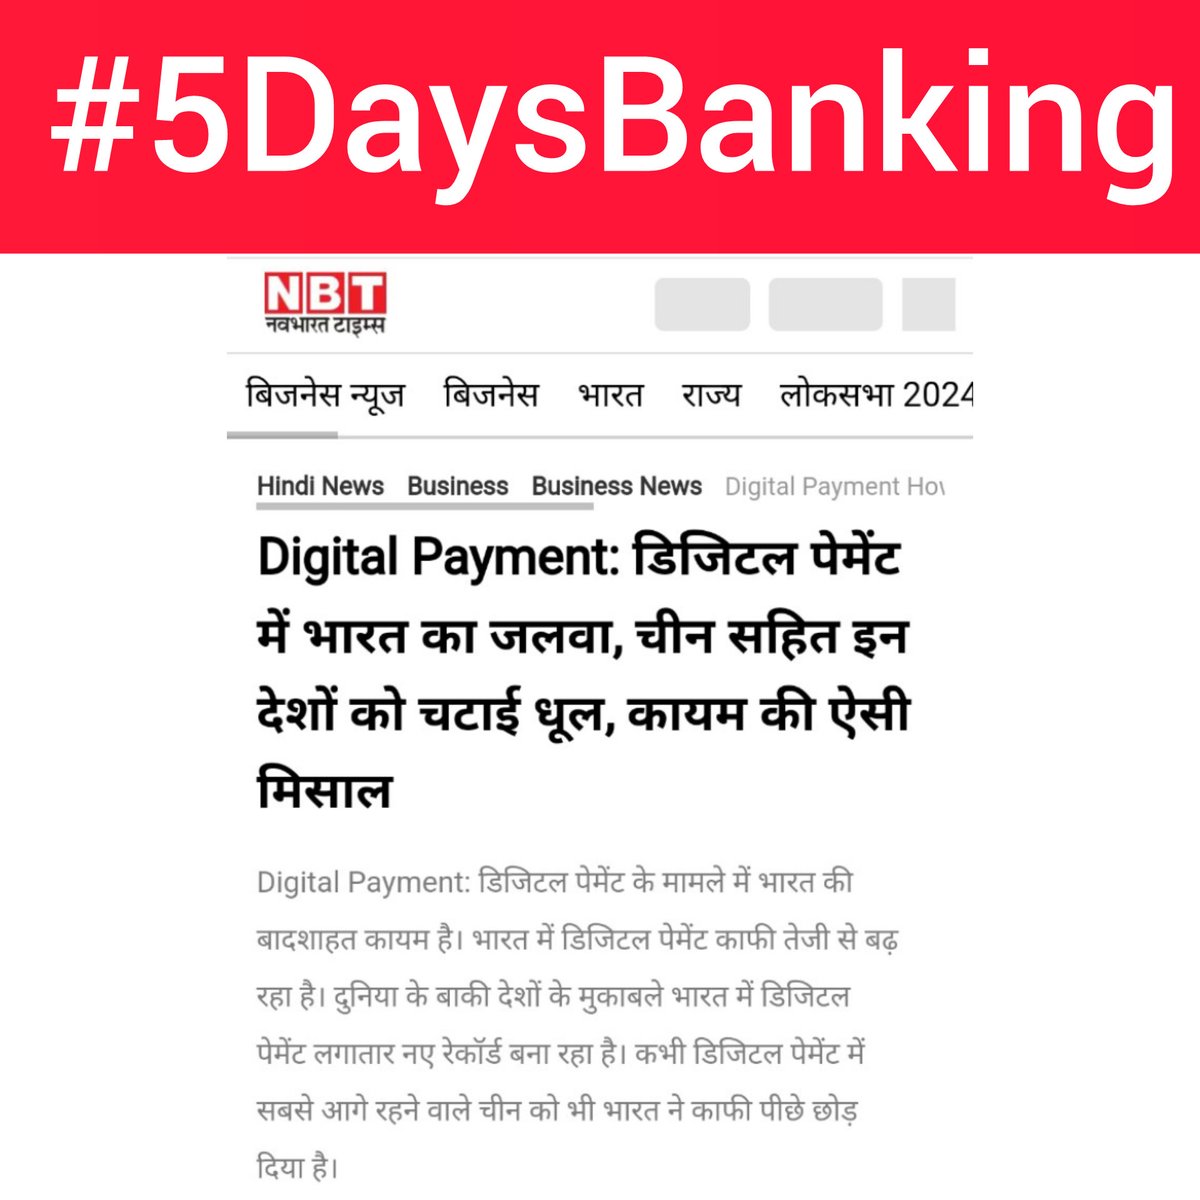 Hello @PMOIndia @narendramodi @nsitharaman @FinMinIndia @DFS_India Bankers commit: At your service anytime by physically being present for 5 days and digitally for all 7 days in every week. We support # Digital India #5DaysBanking